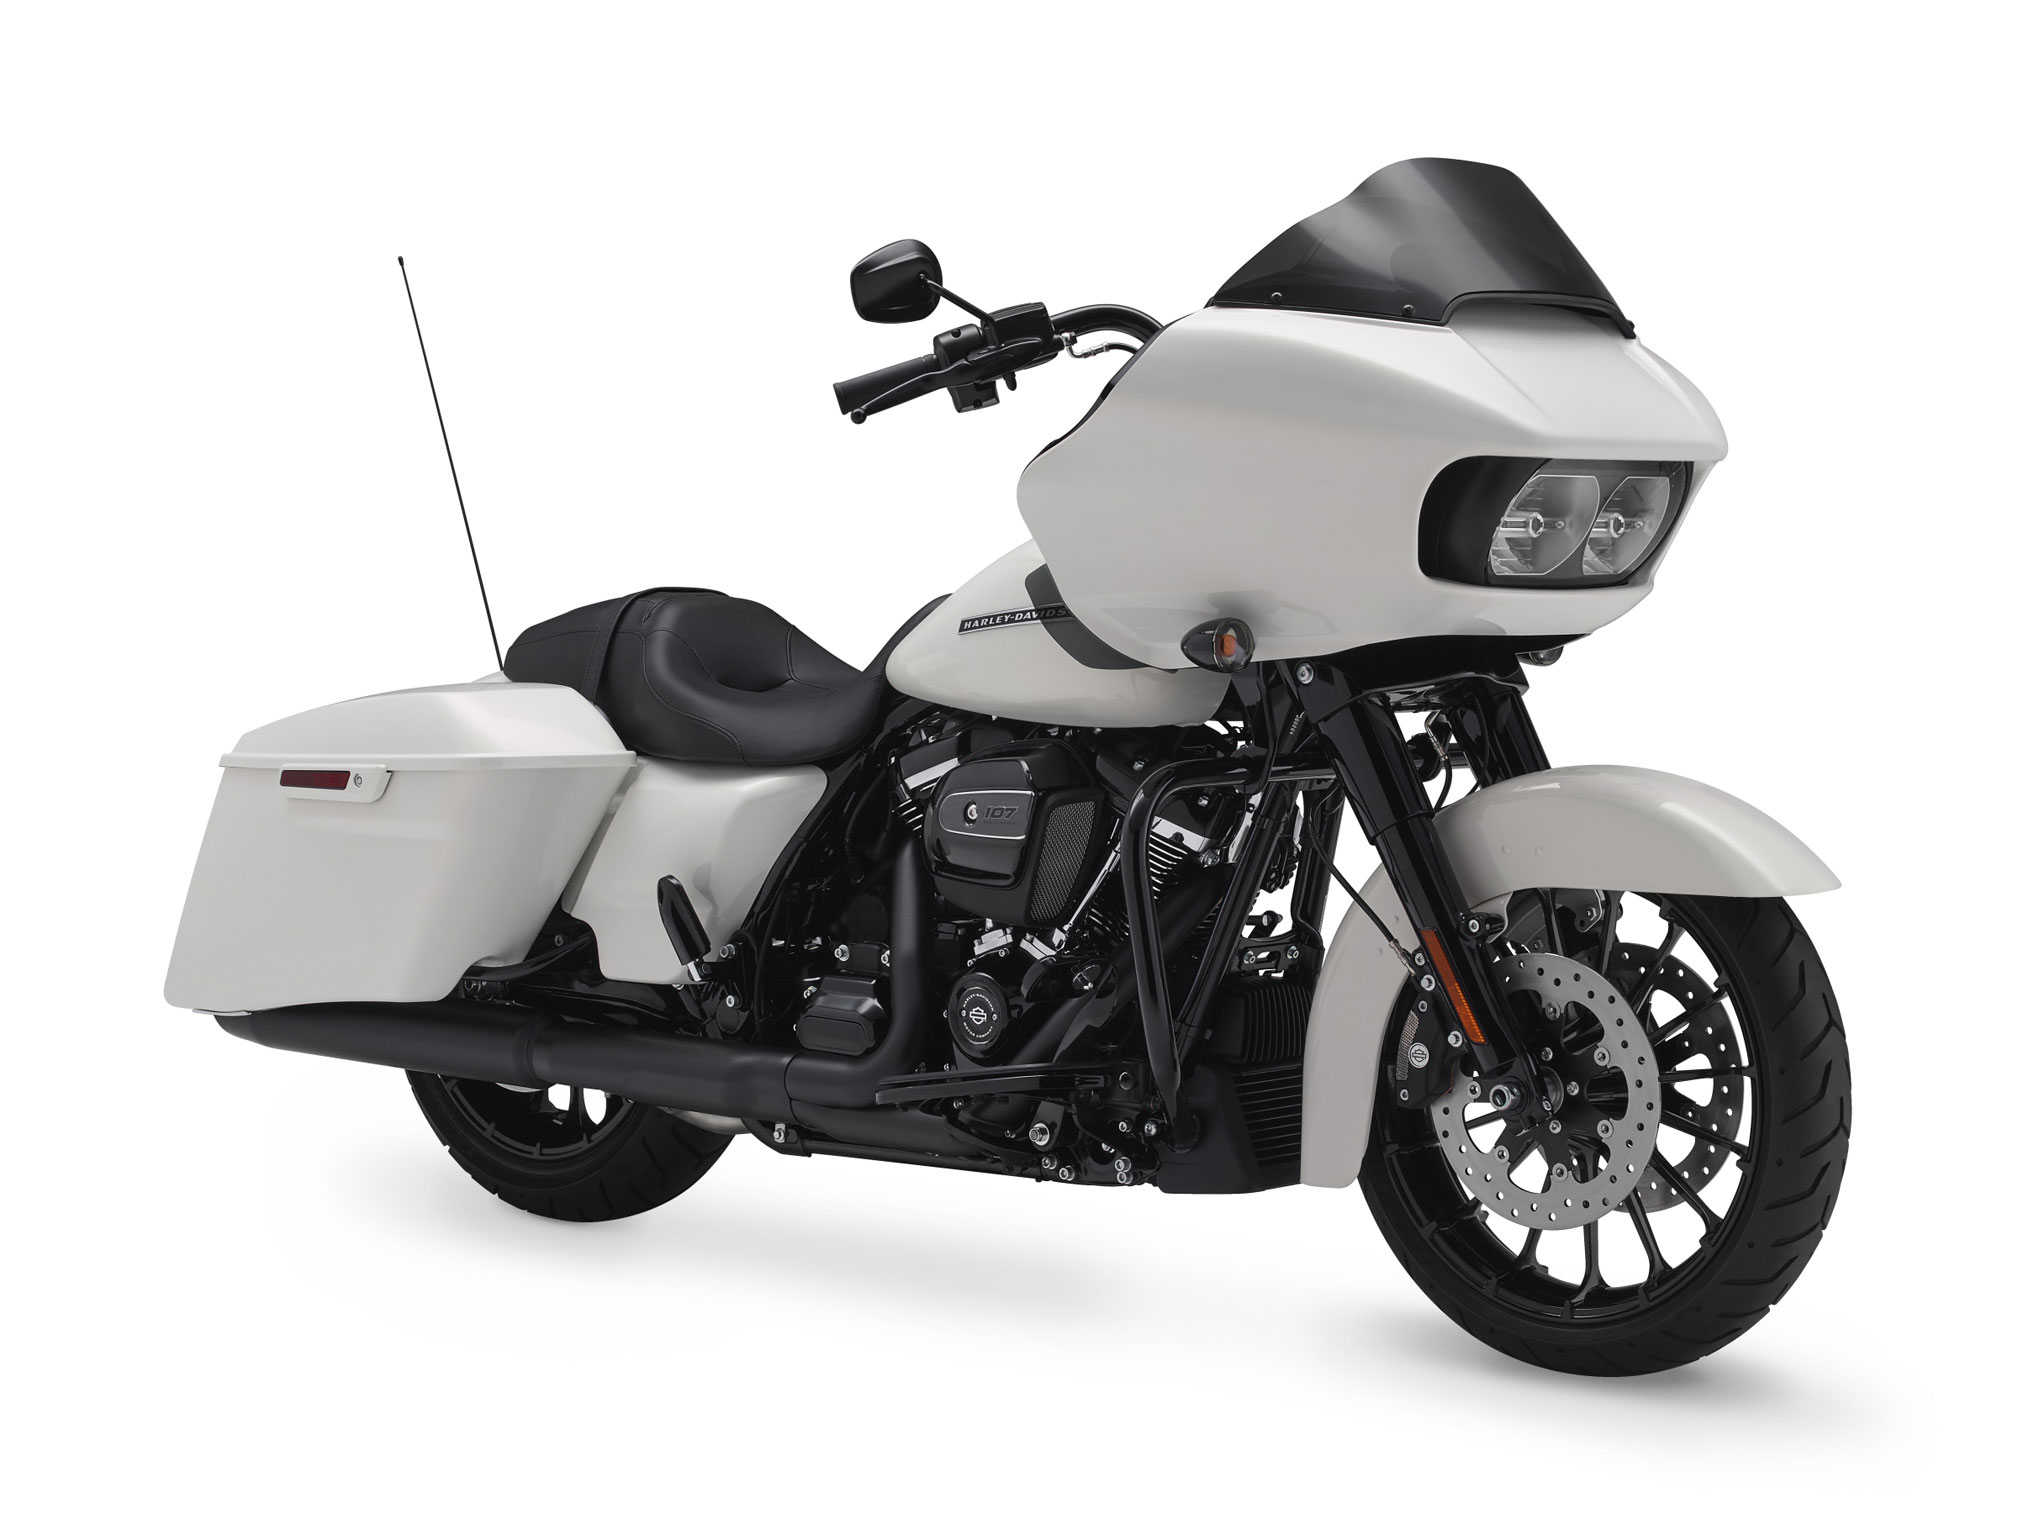 2018 Harley Davidson Road Glide Special Review Total Motorcycle